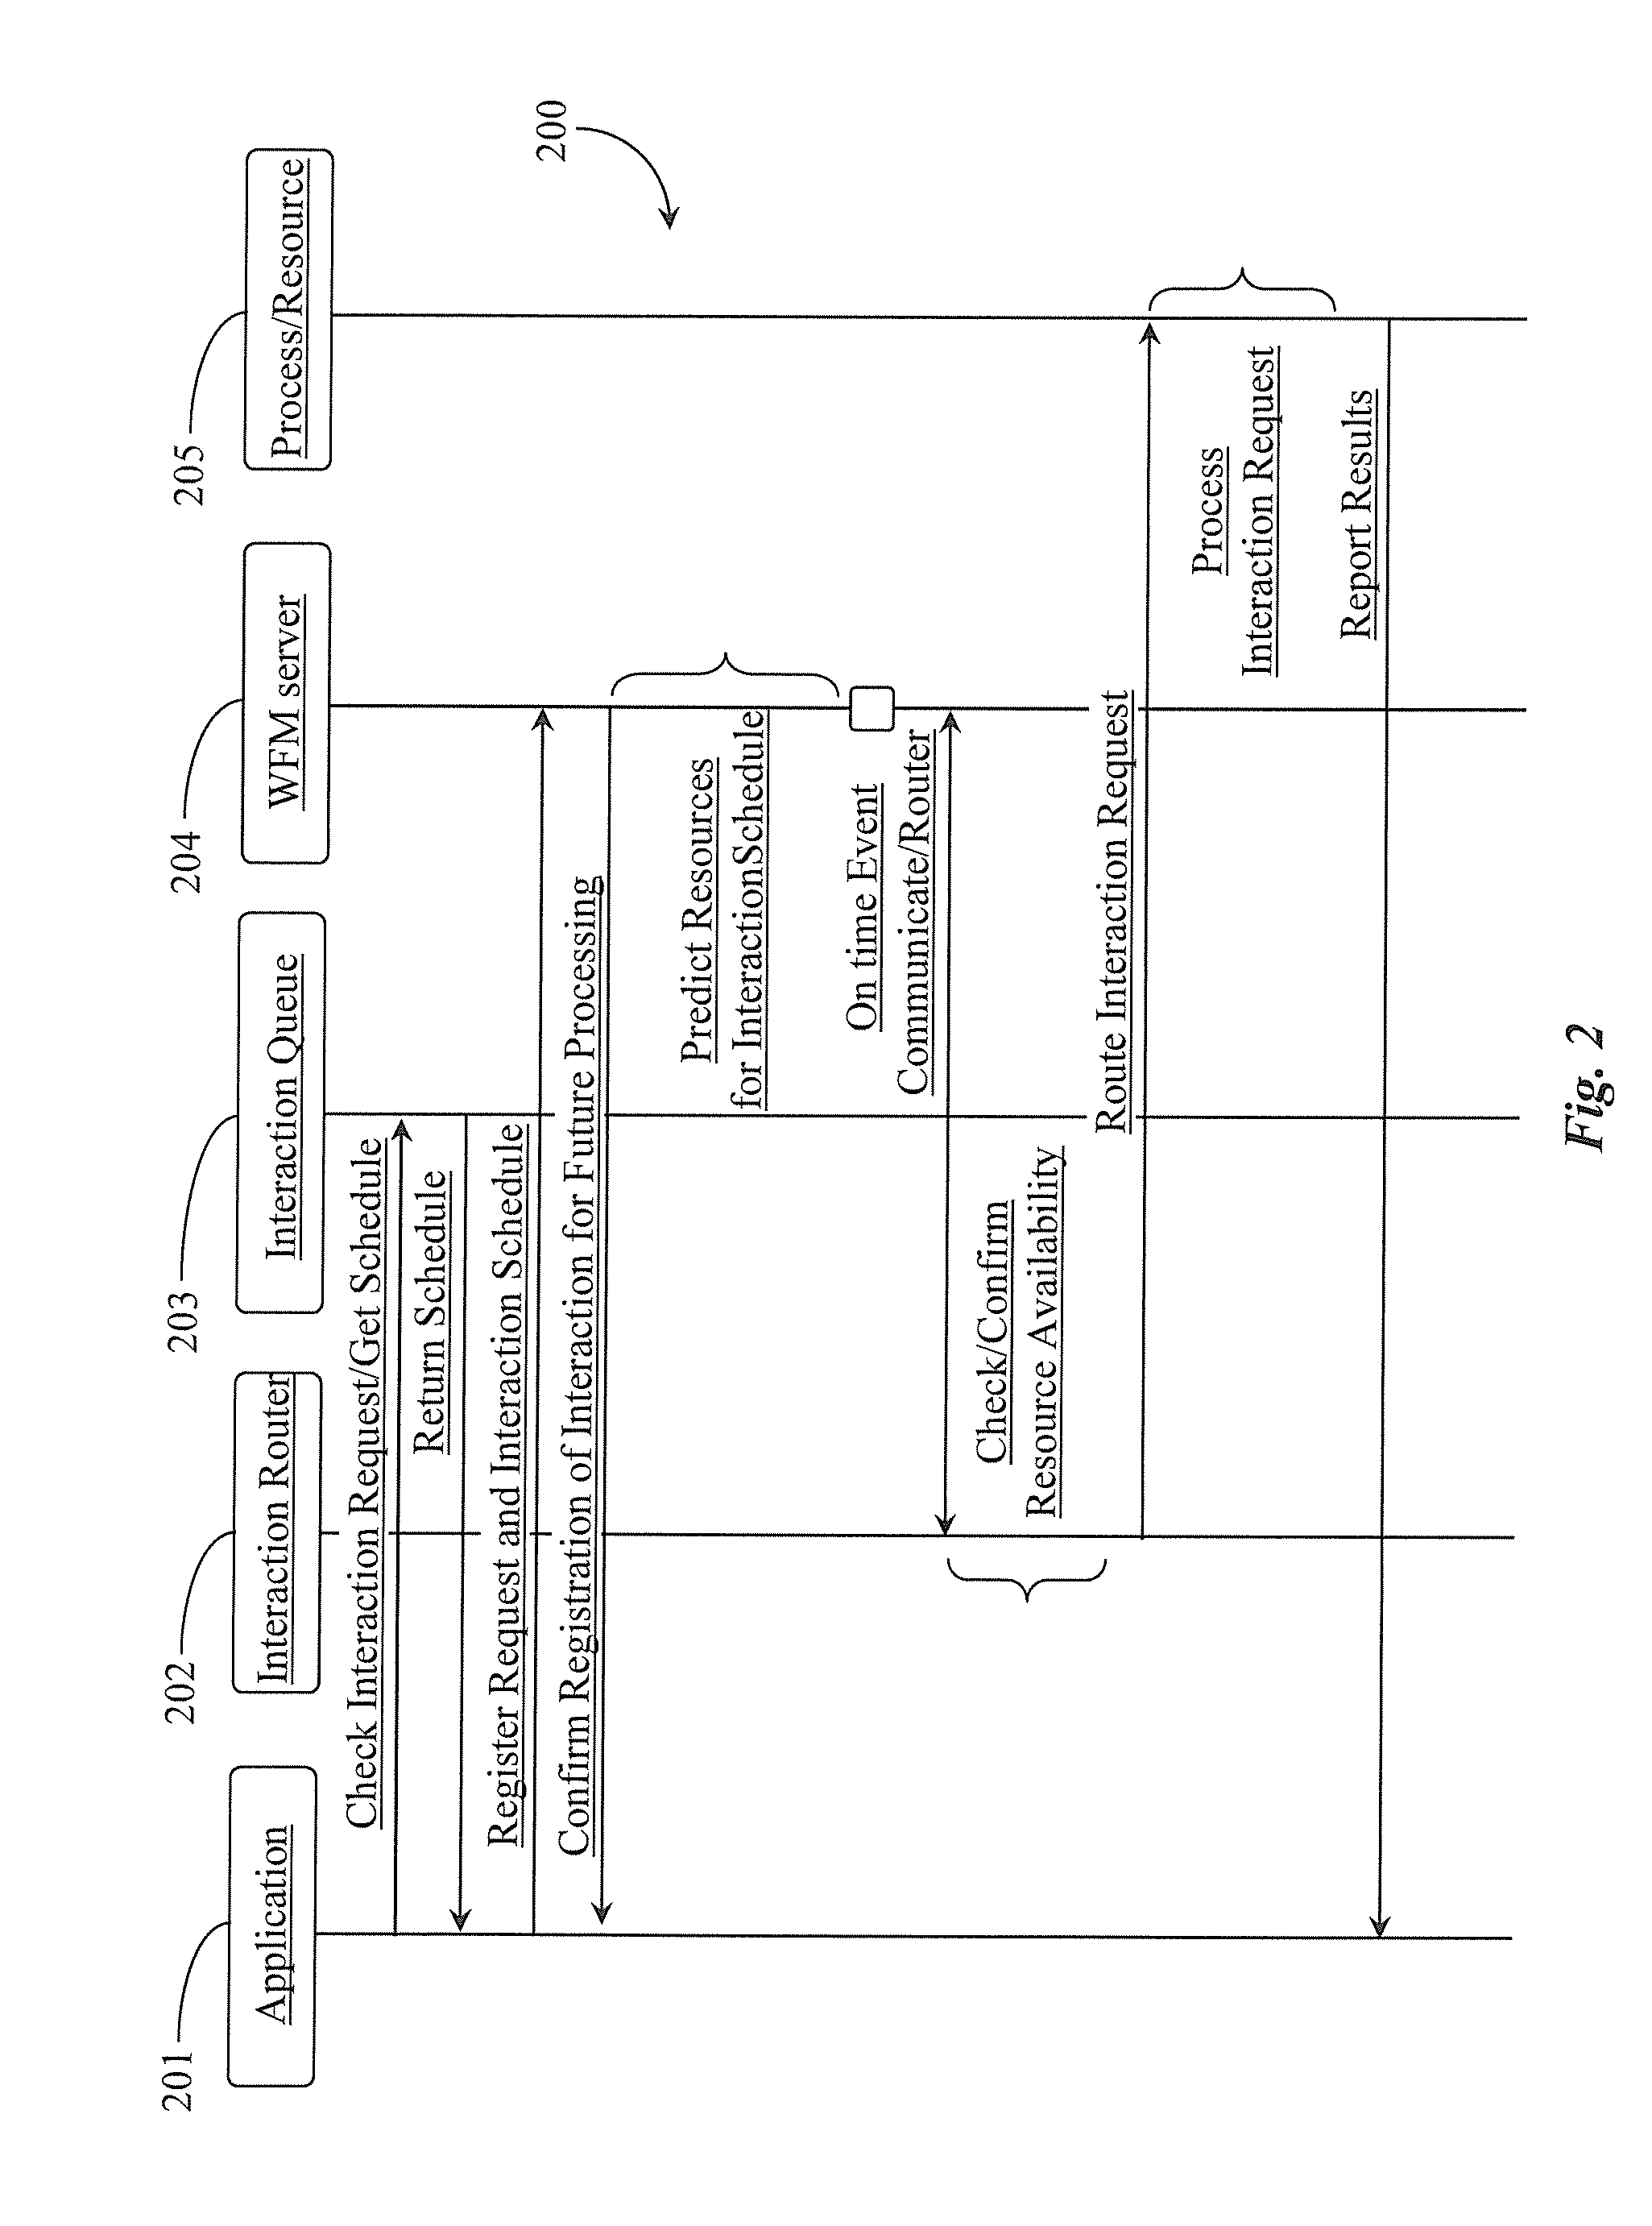 Interaction request processing according to client pre-configured schedule